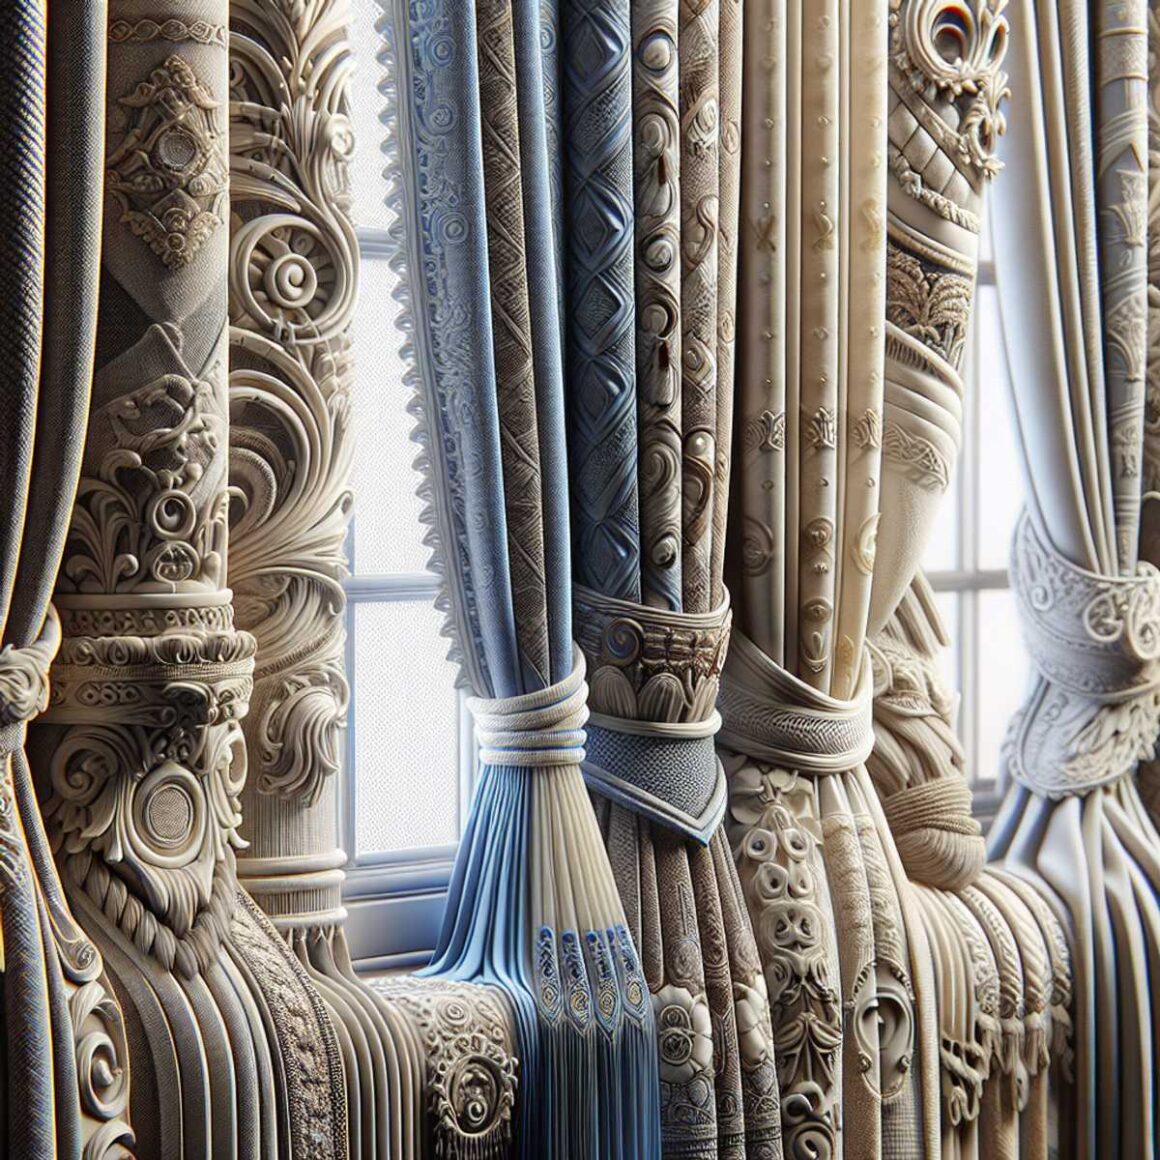 A close-up of a variety of window curtains with different patterns and textures.